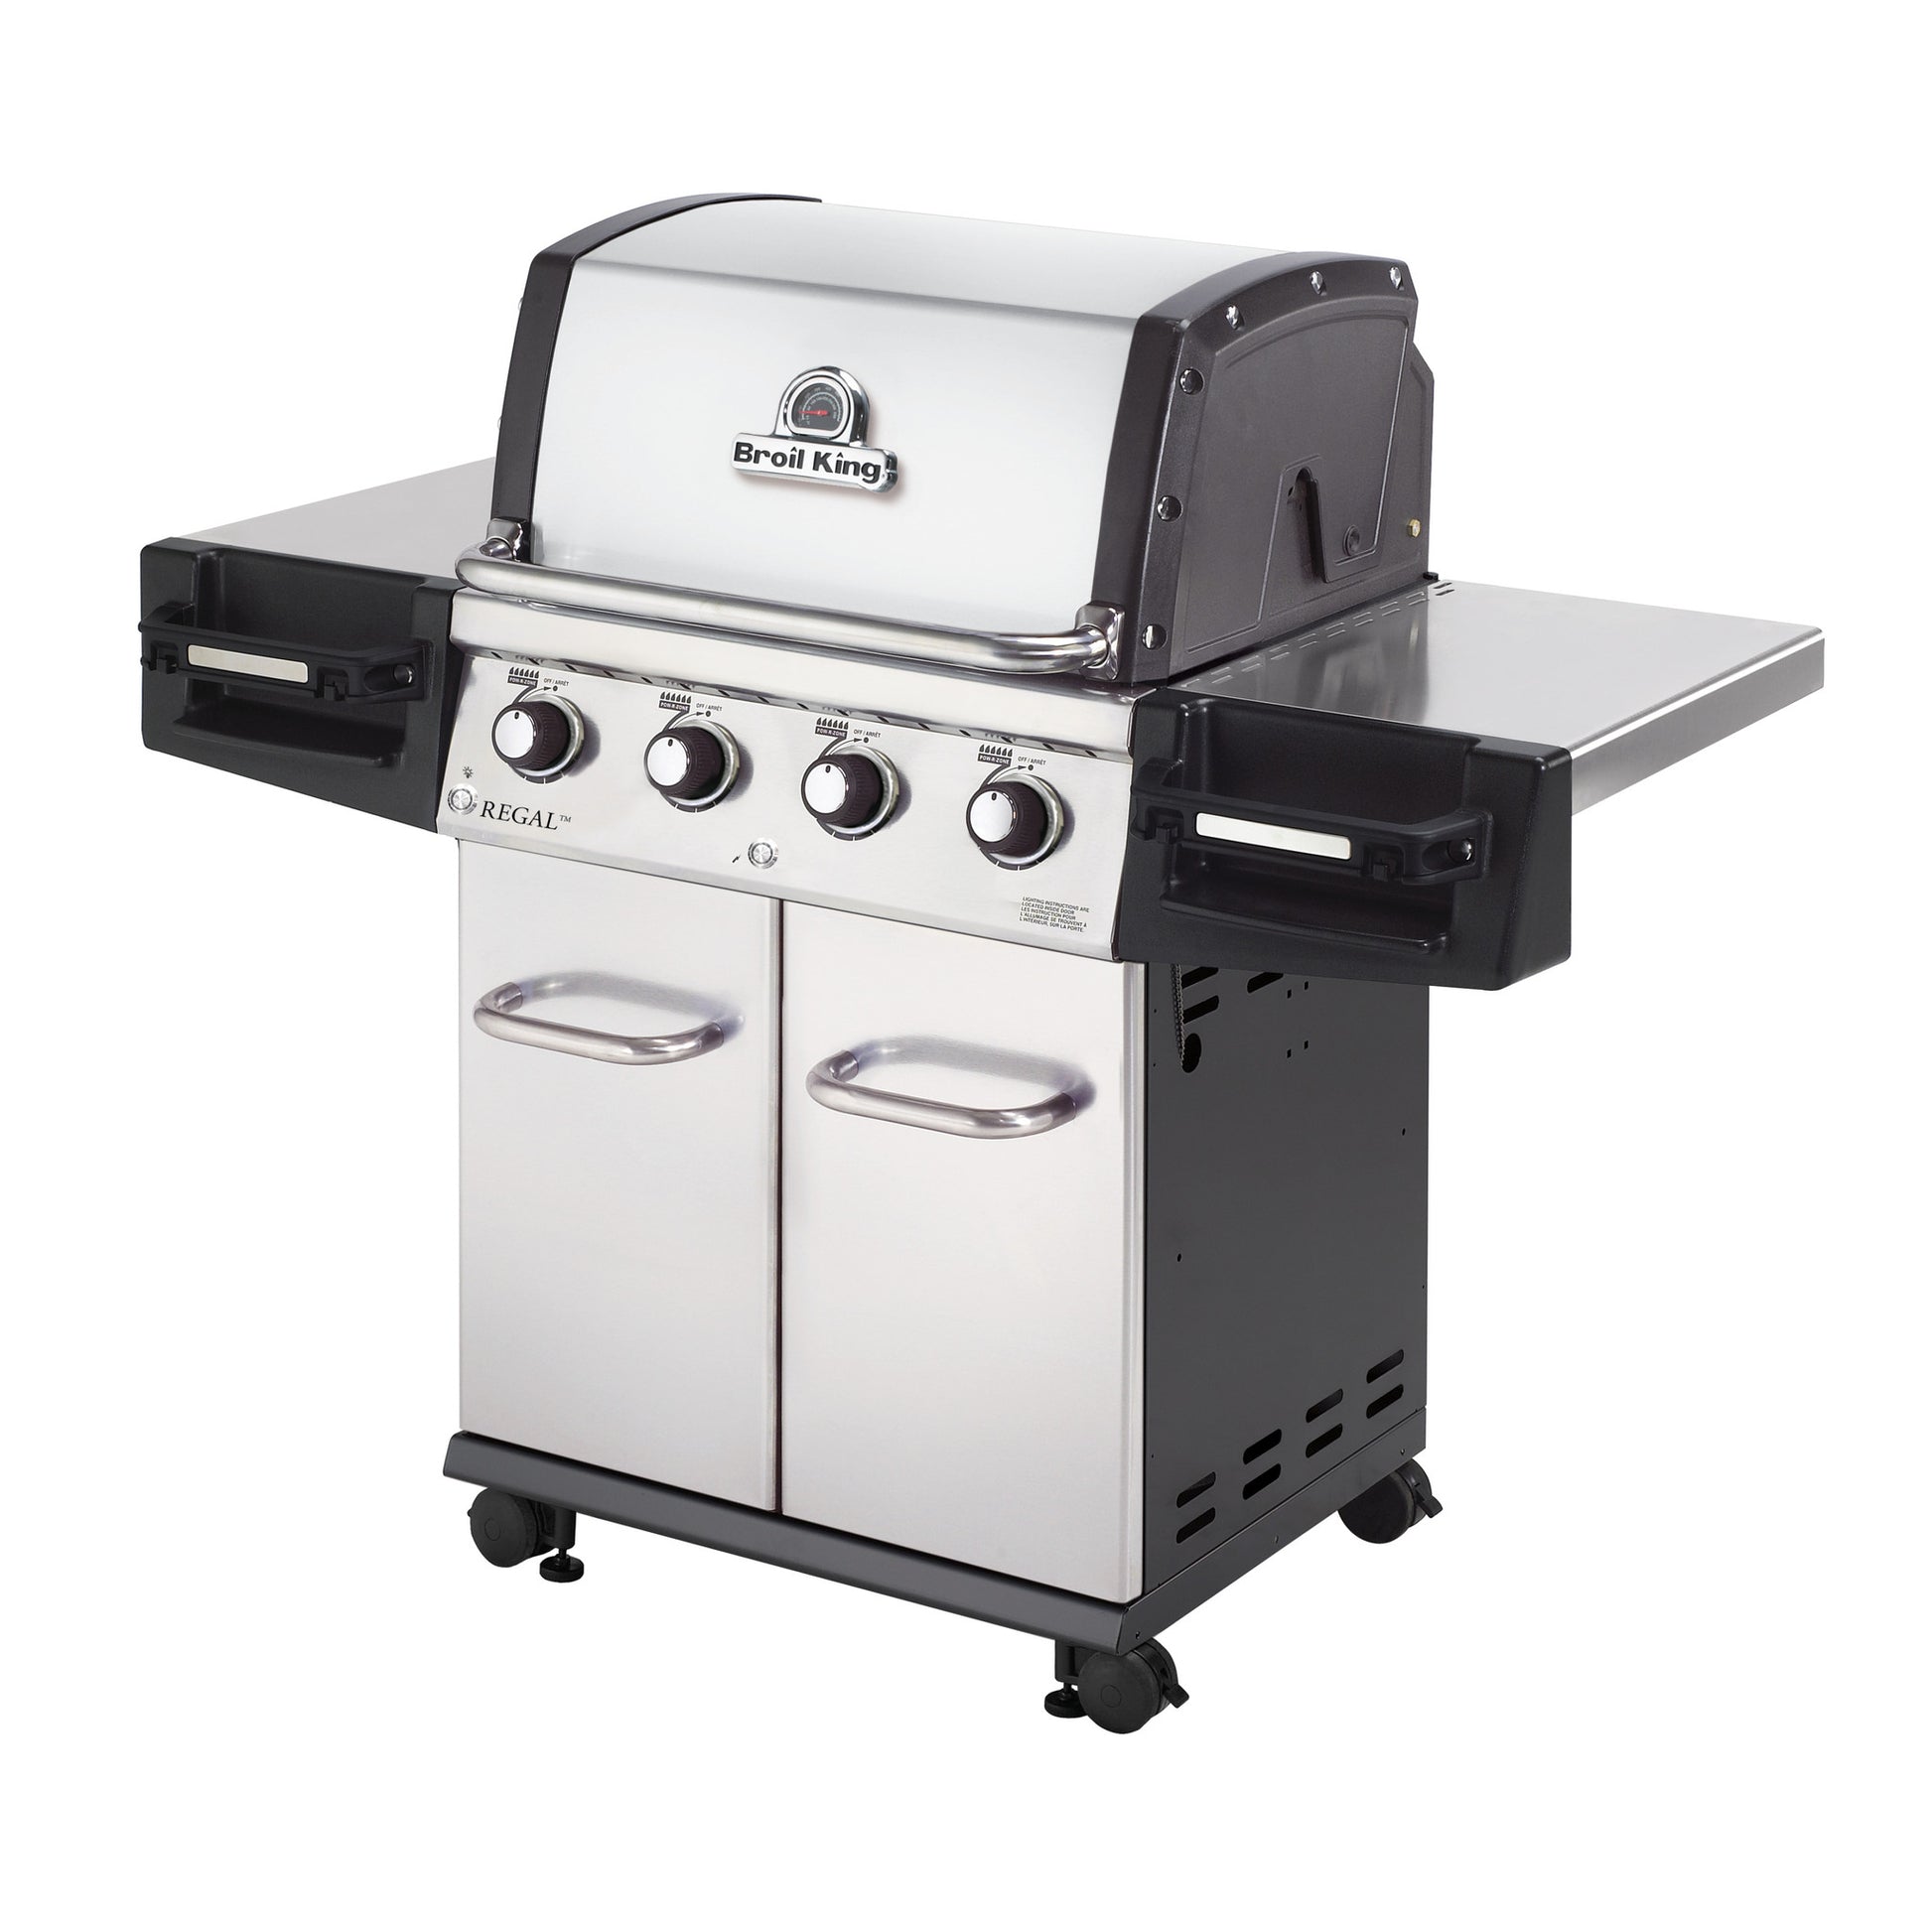 Broil King Regal S420 PRO Stainless Steel Barbecue